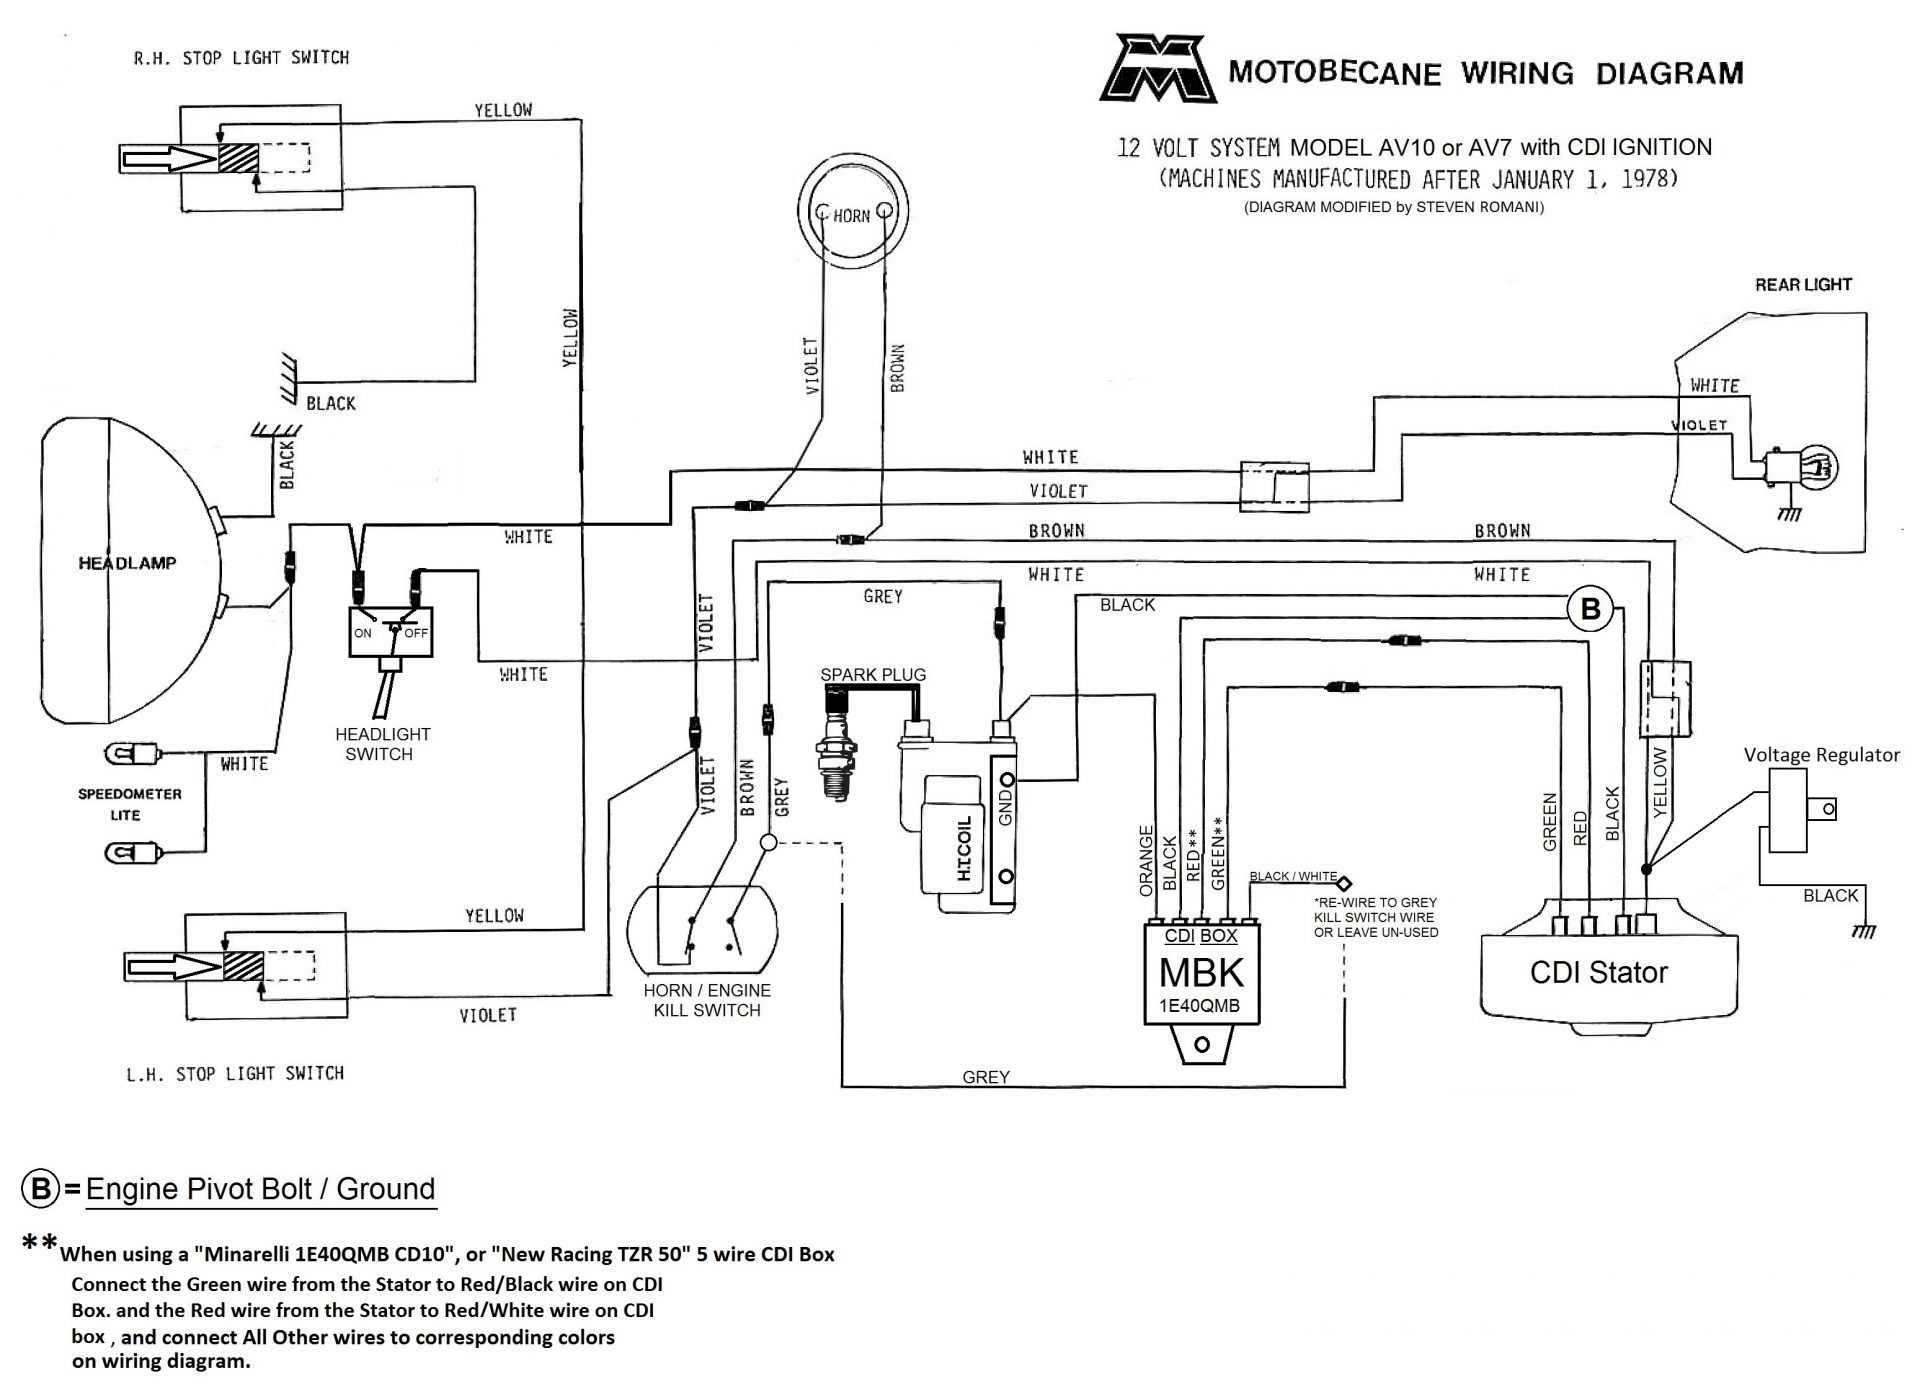 5 Pin Cdi Wiring Diagram Unique Famous 6 Wire Cdi Wiring Diagram Electrical Circuit